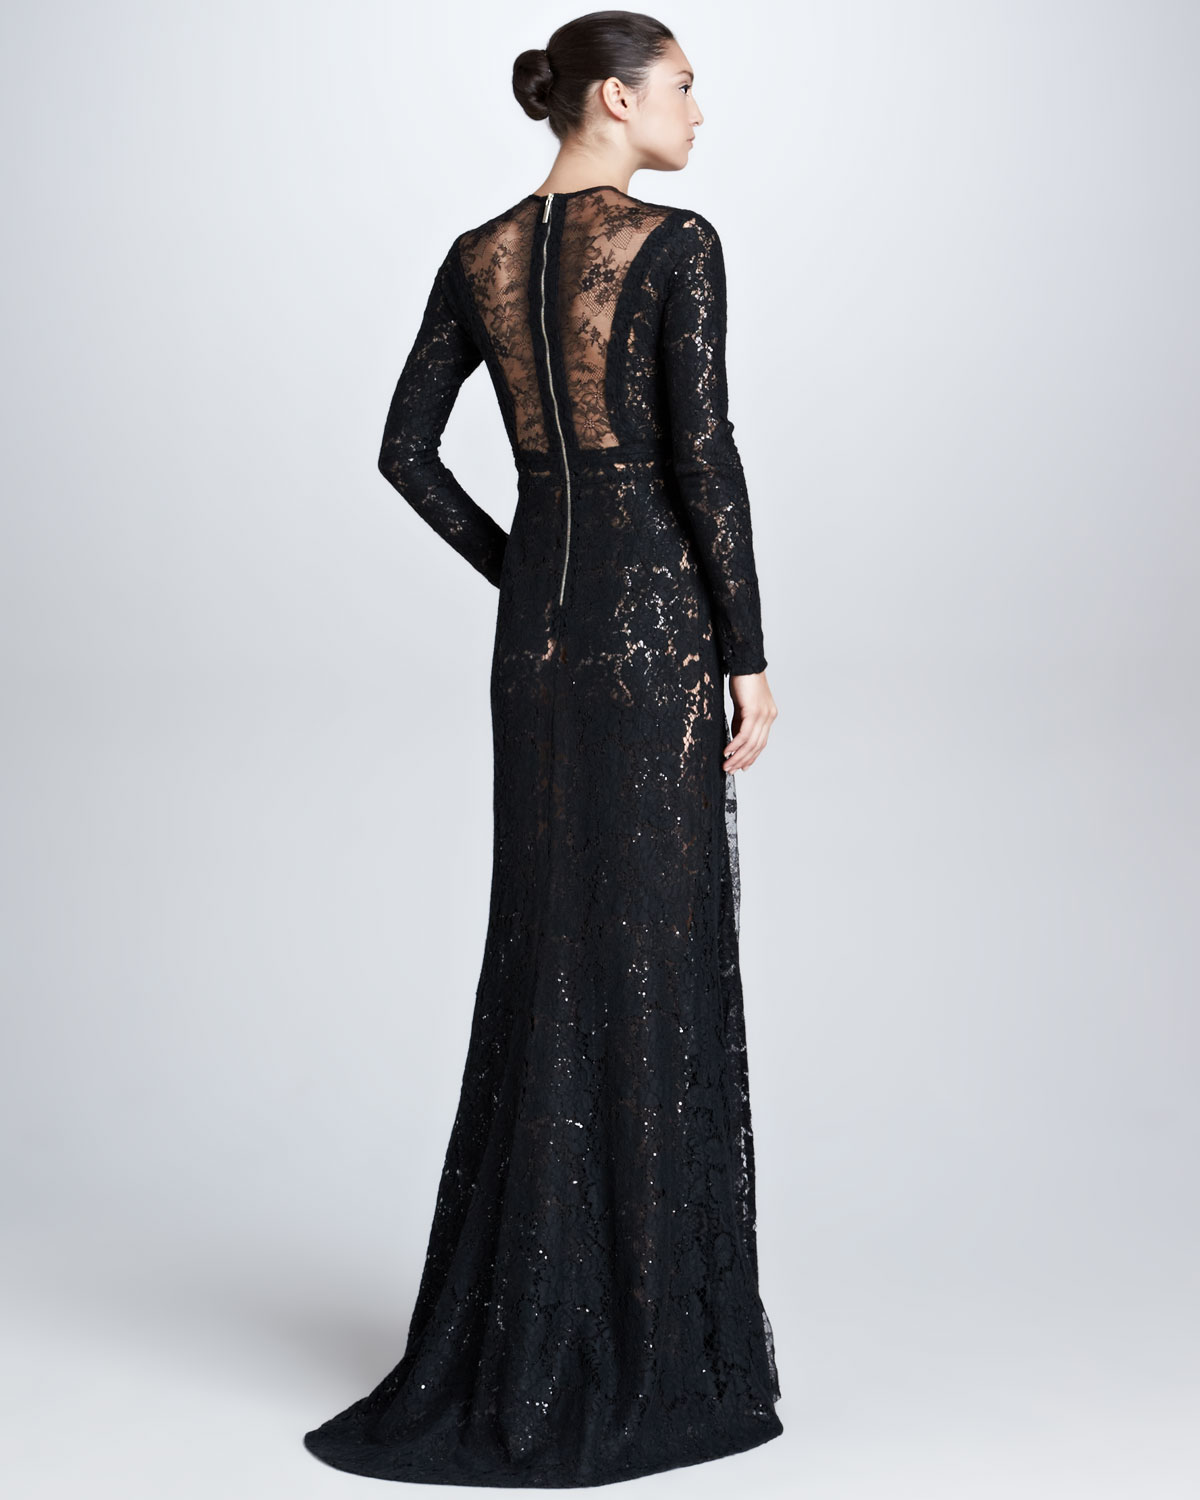 Lyst - Elie saab Long Sleeve Lace Gown in Black